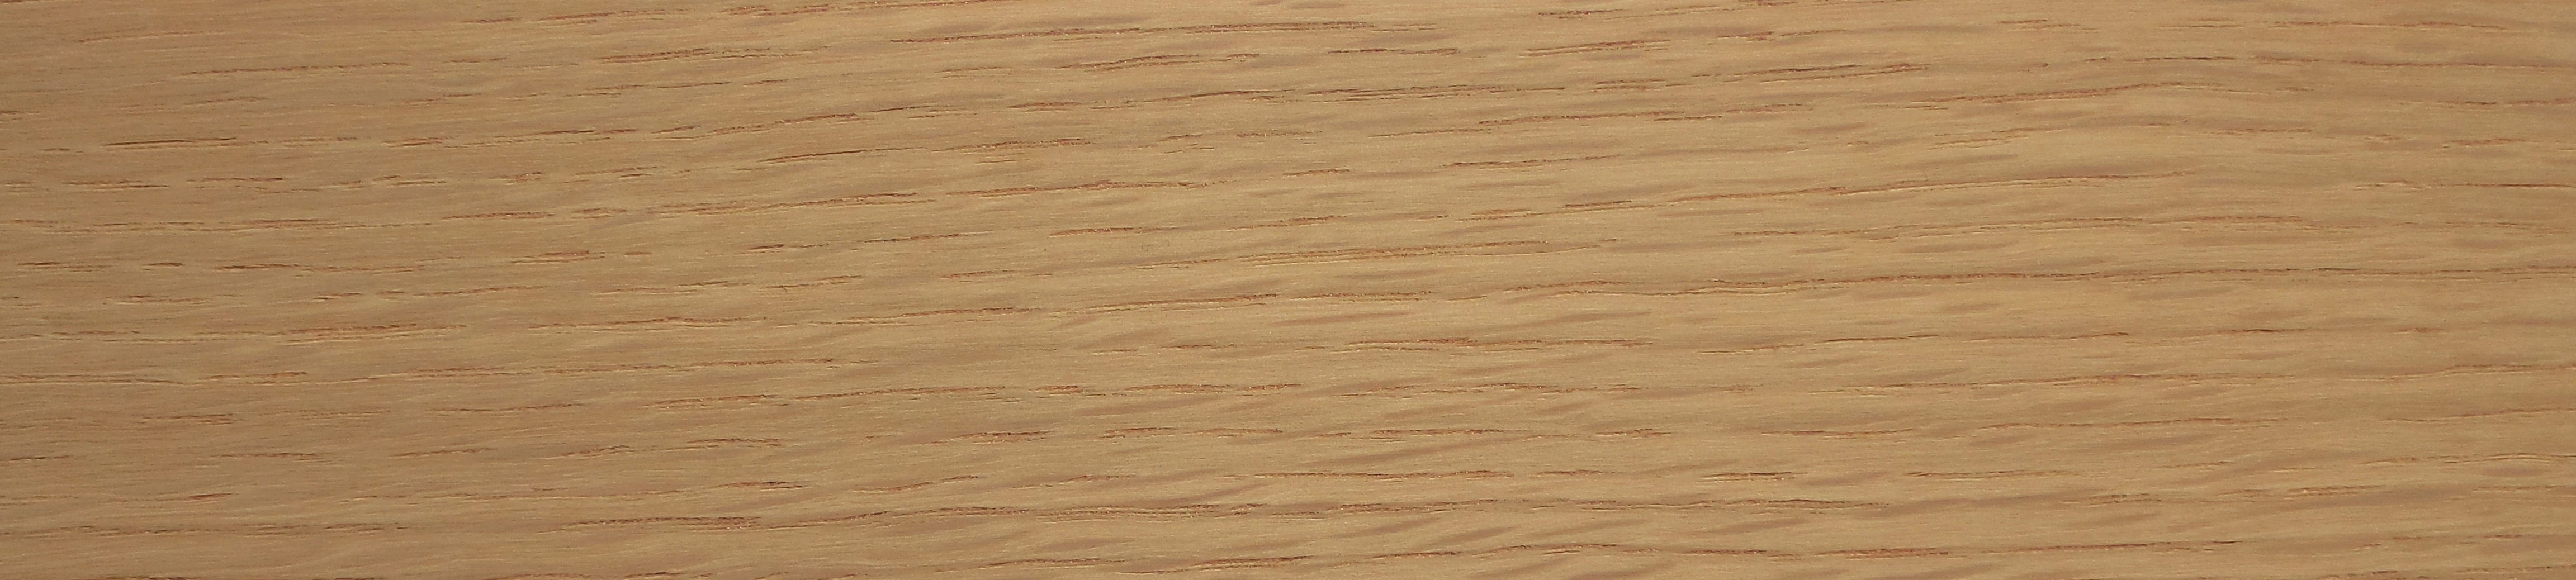 American White Oak Thickwood Unglued Edging / Lipping 24mm x 1mm Thick Oak Wood Edging